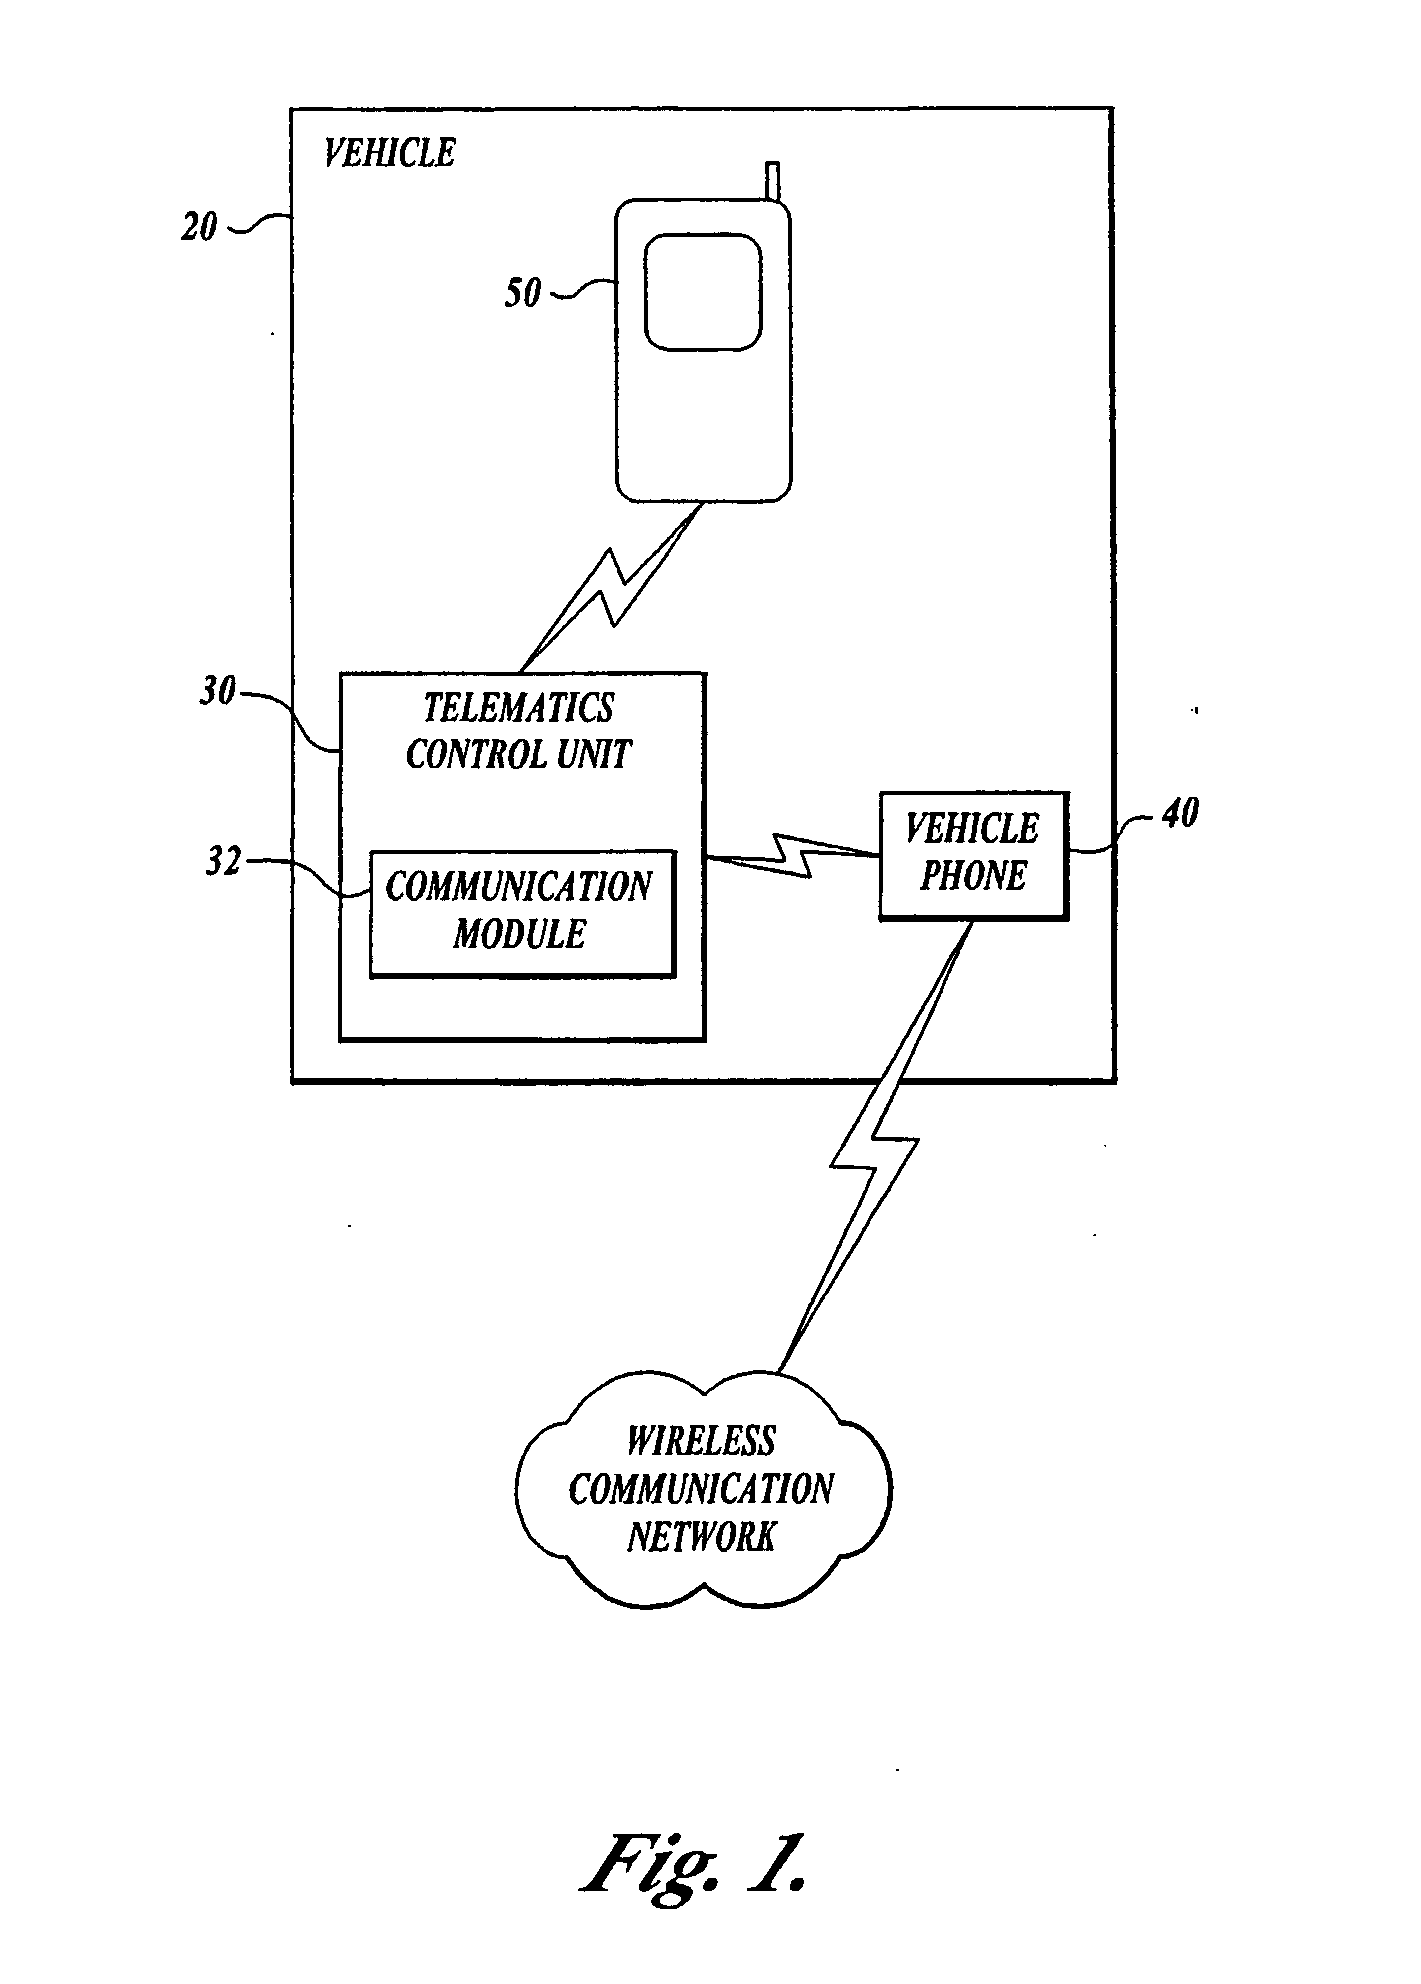 Sharing account information and a phone number between personal mobile phone and an in-vehicle embedded phone